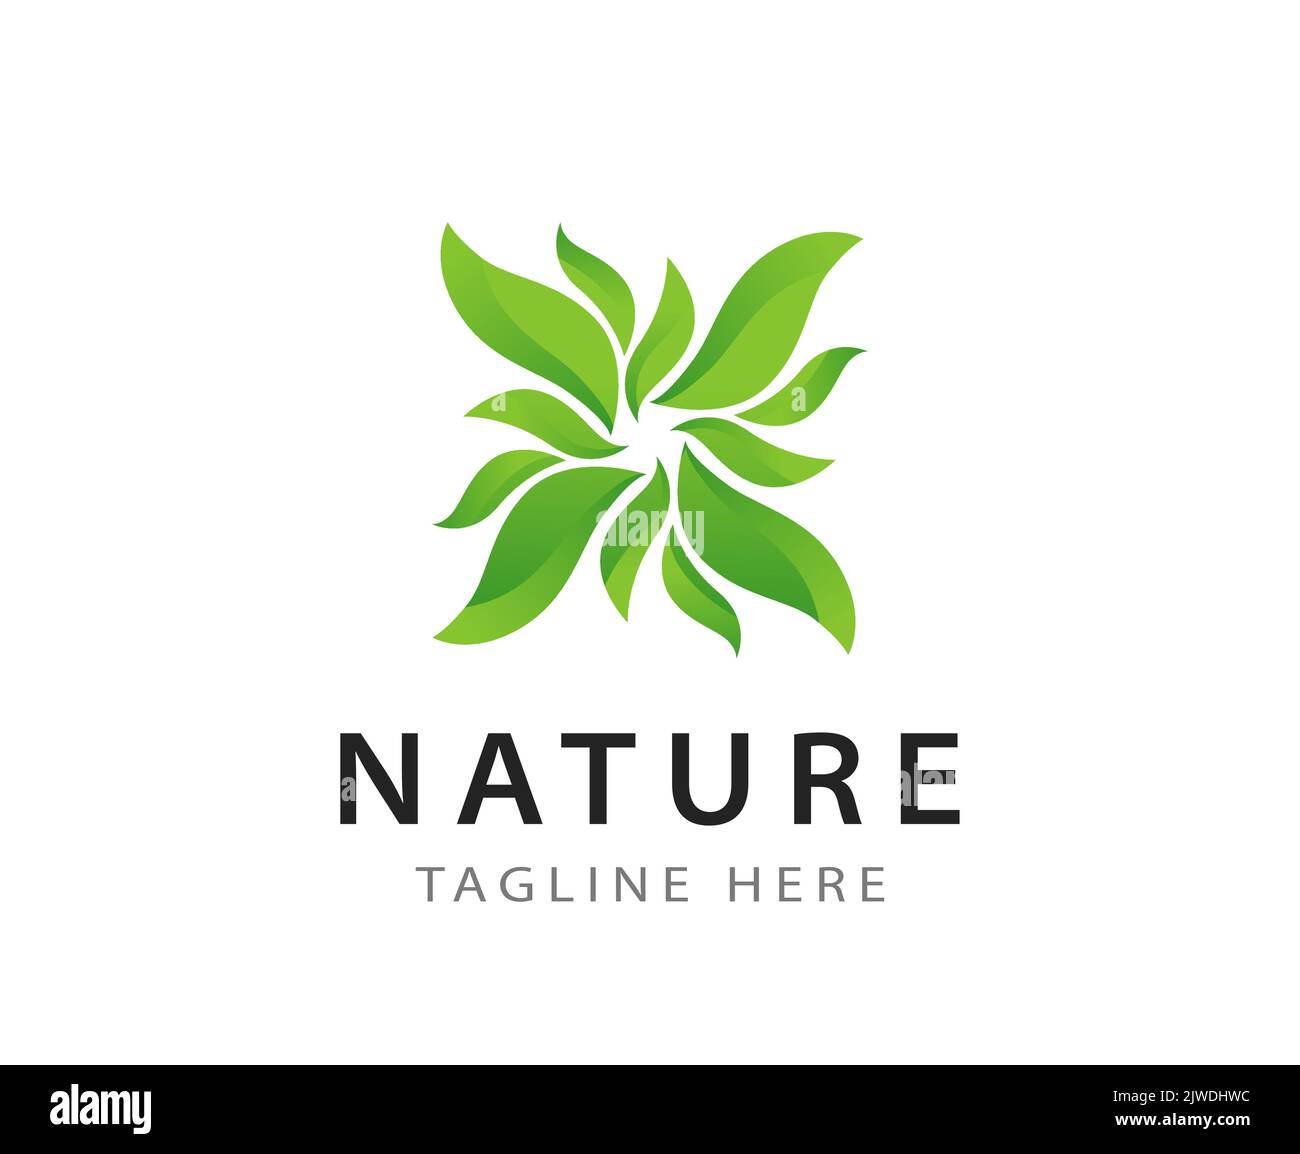 Ecology logotype with green leaves in creative round shape. Seal with text caption - Name and Description or Slogan. Stock Vector